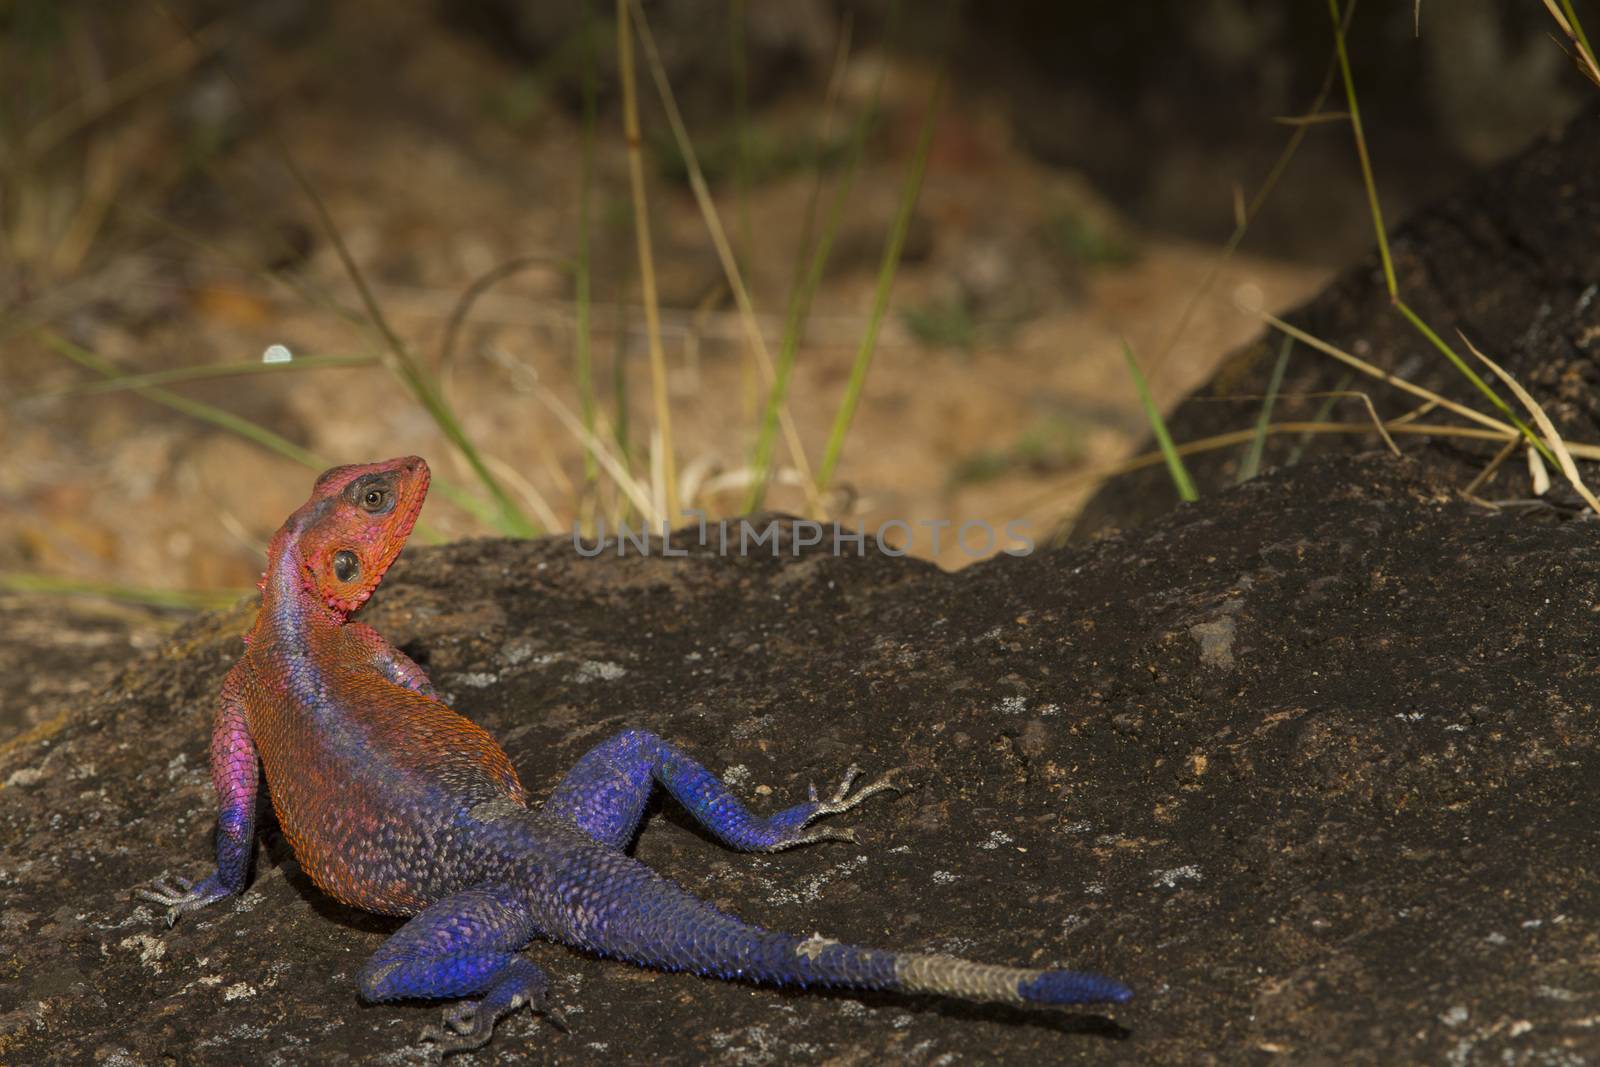 Agama agama in the wilderness of Africa